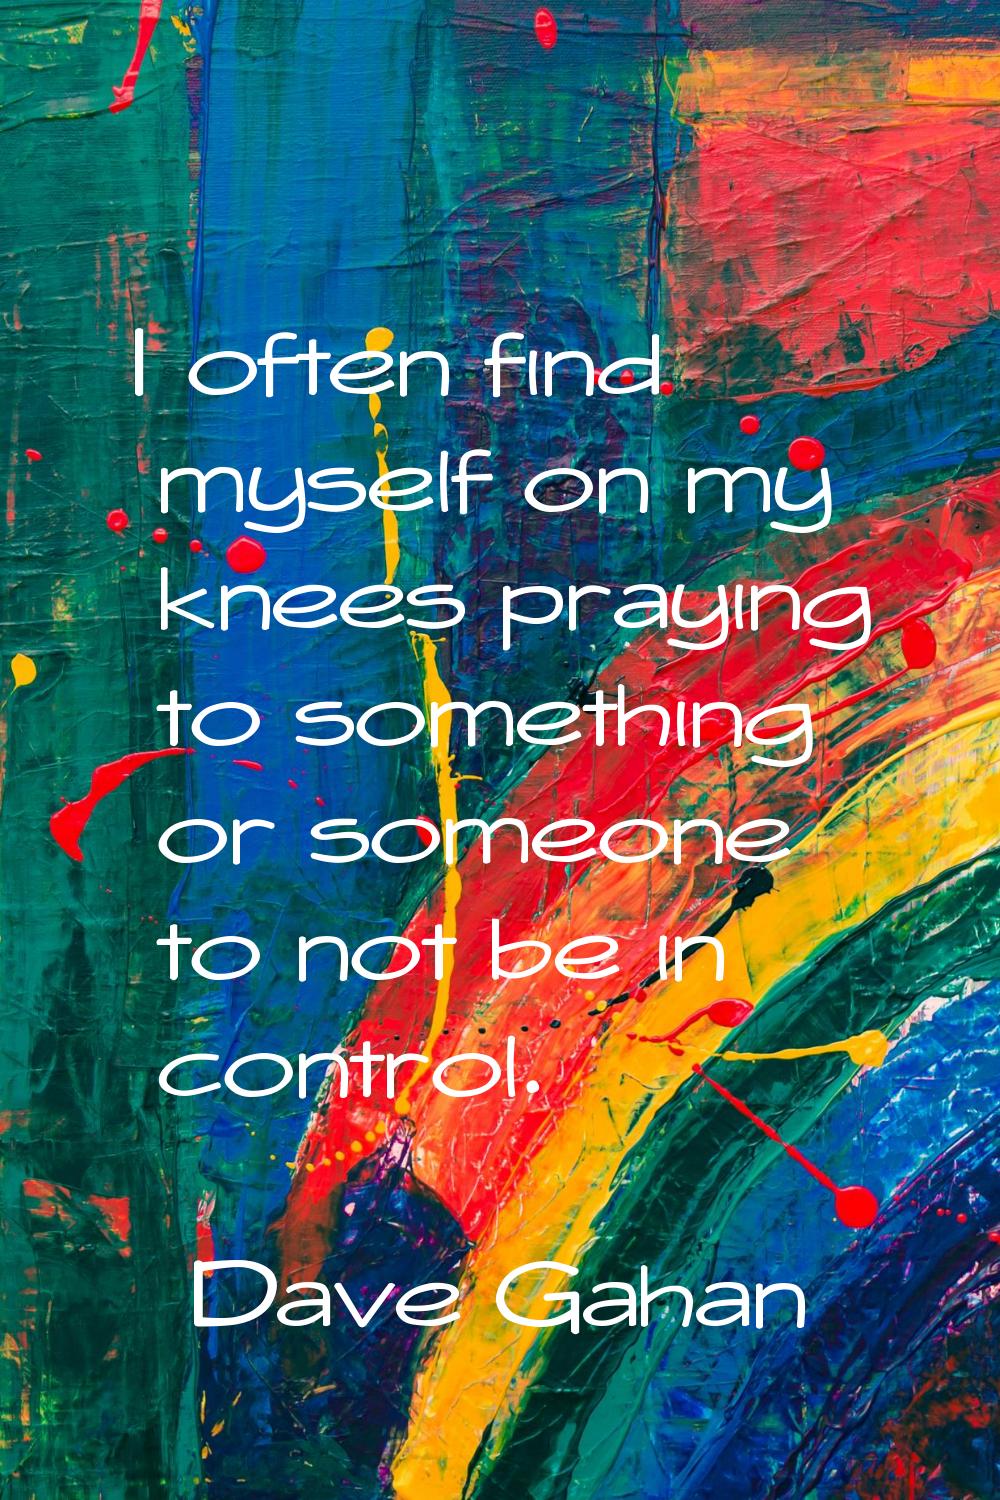 I often find myself on my knees praying to something or someone to not be in control.